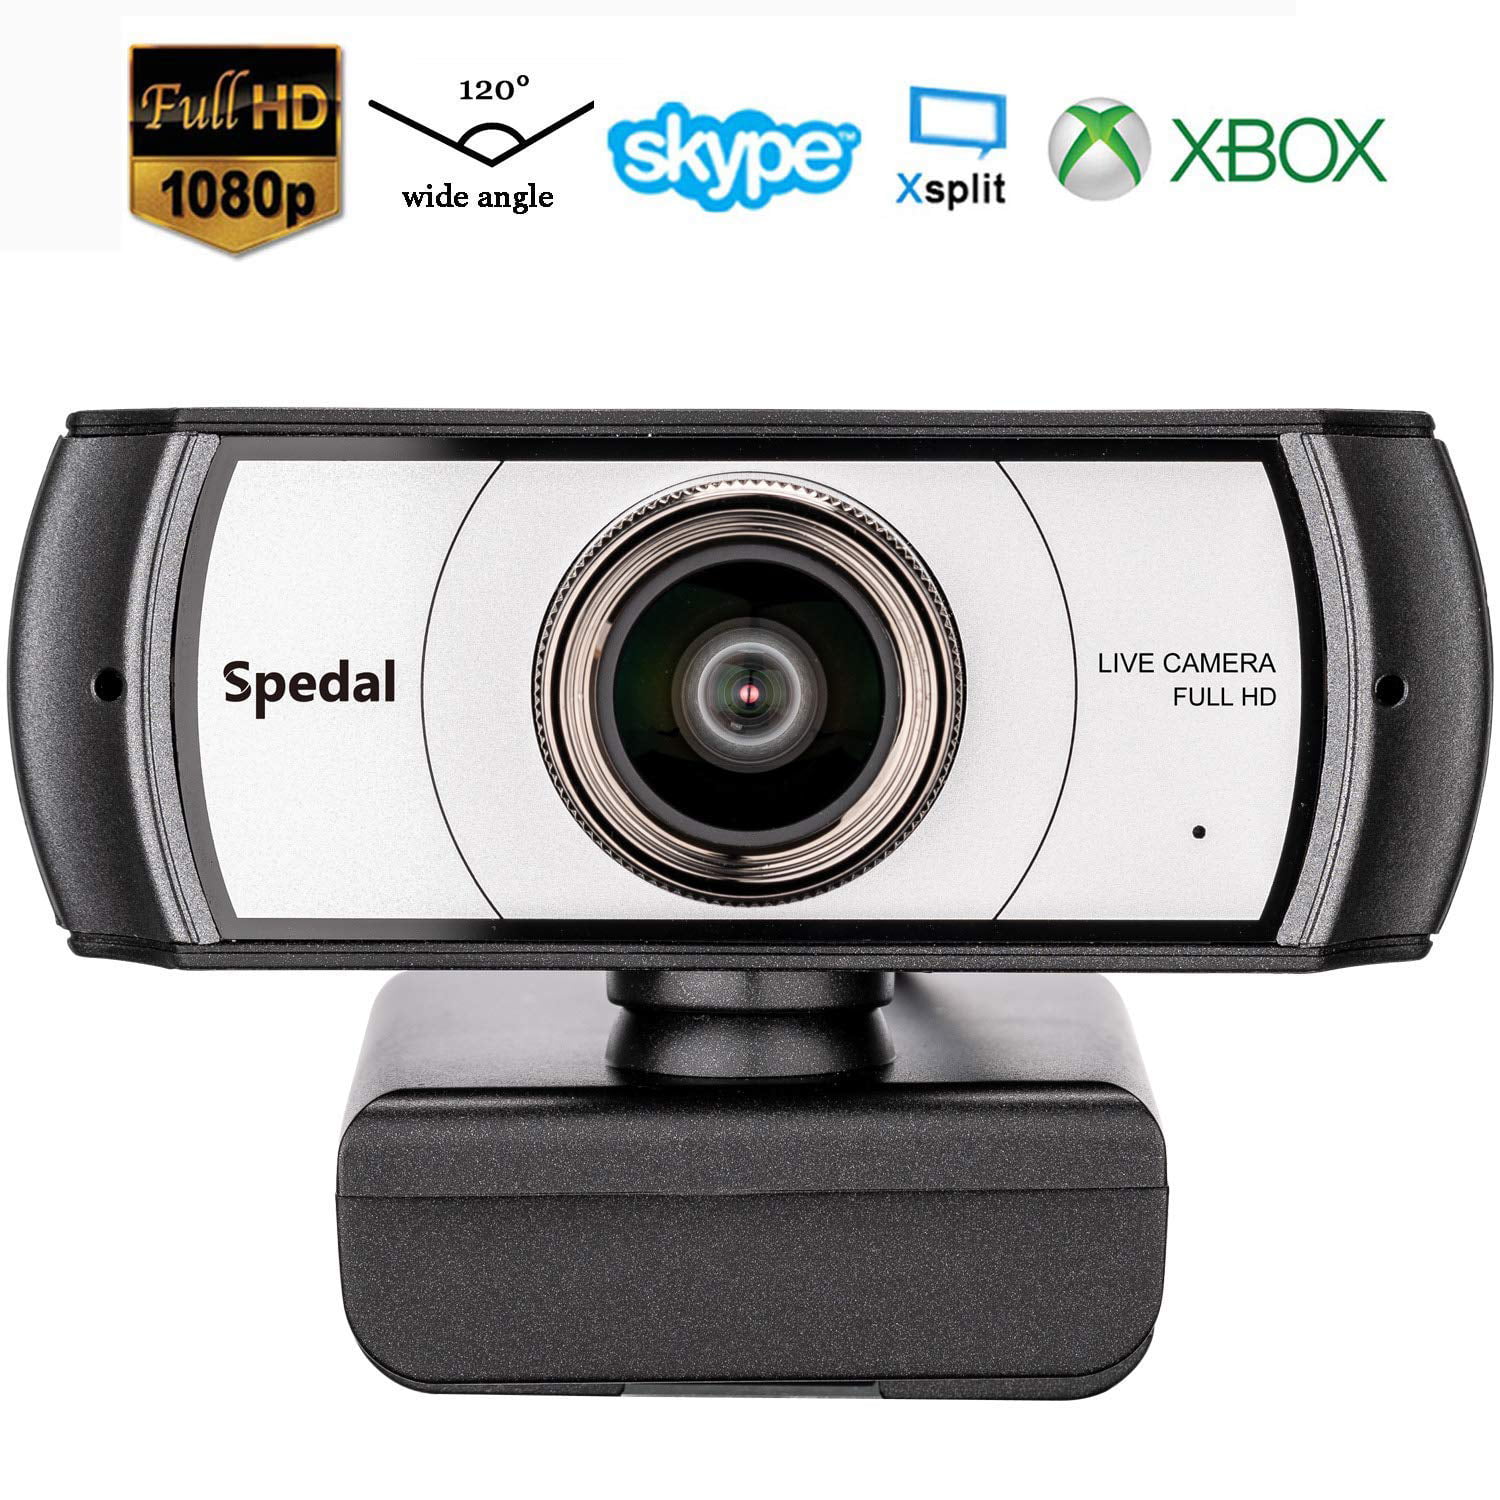 Wide Angle Webcam,120 Degree Large View Spedal 920 Pro Video Conference Camera, Full HD 1080P ...